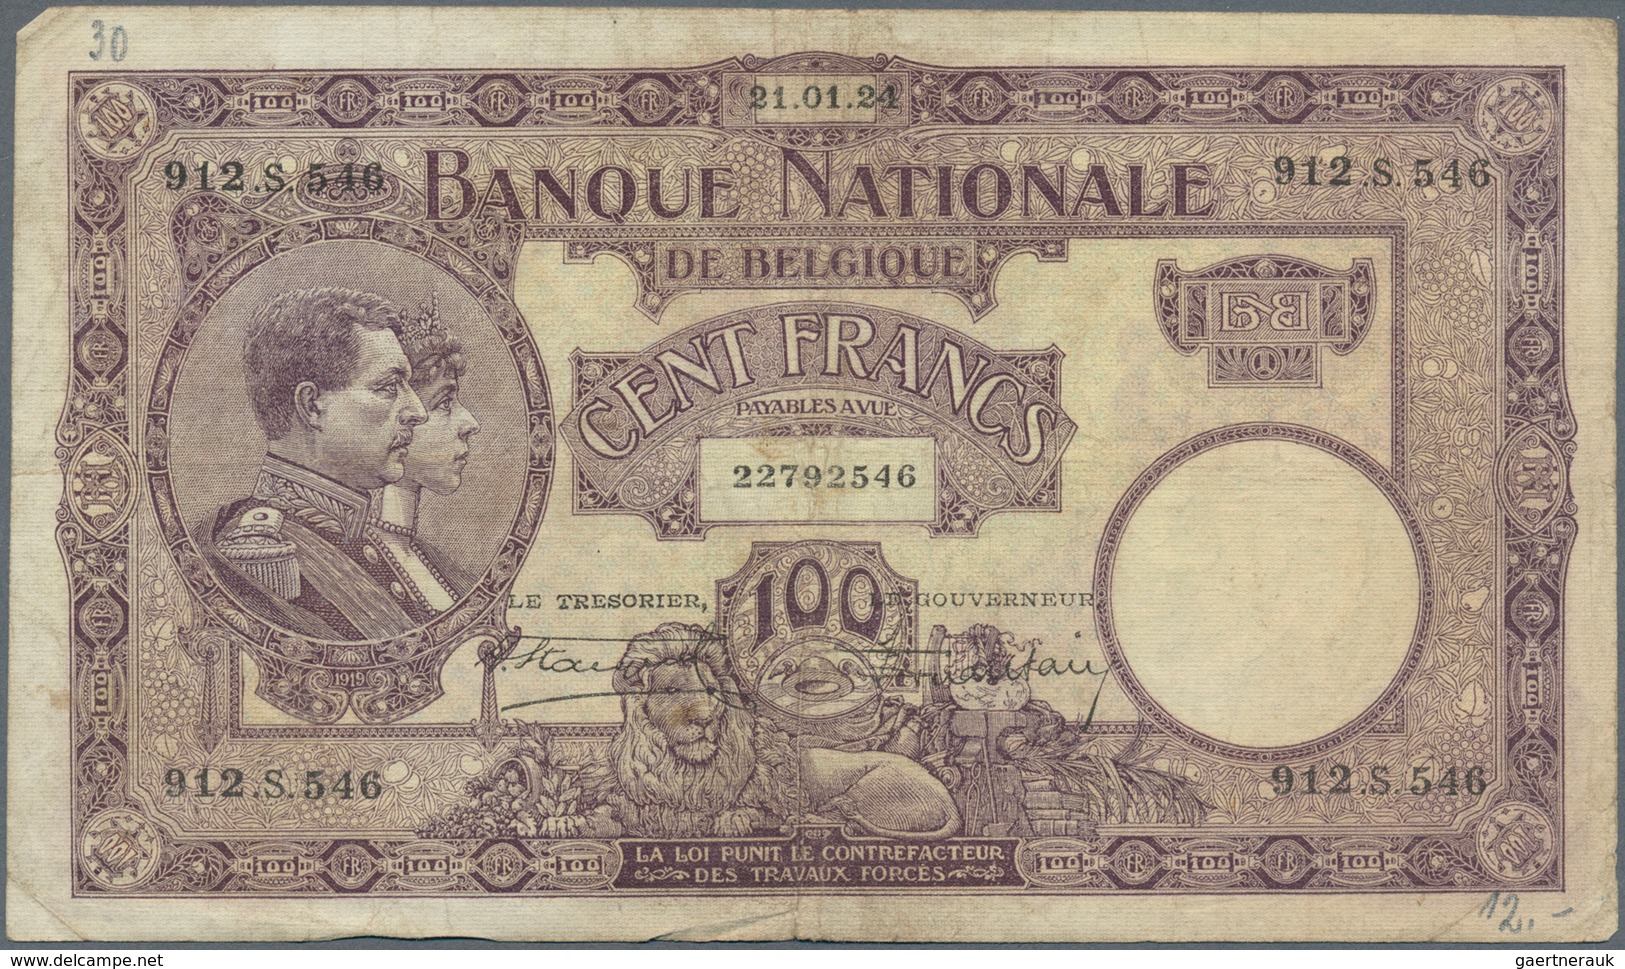 01124 Belgium / Belgien: set with 4 Banknotes 100 Francs 1924 and 1927, P.95 in almost well worn condition